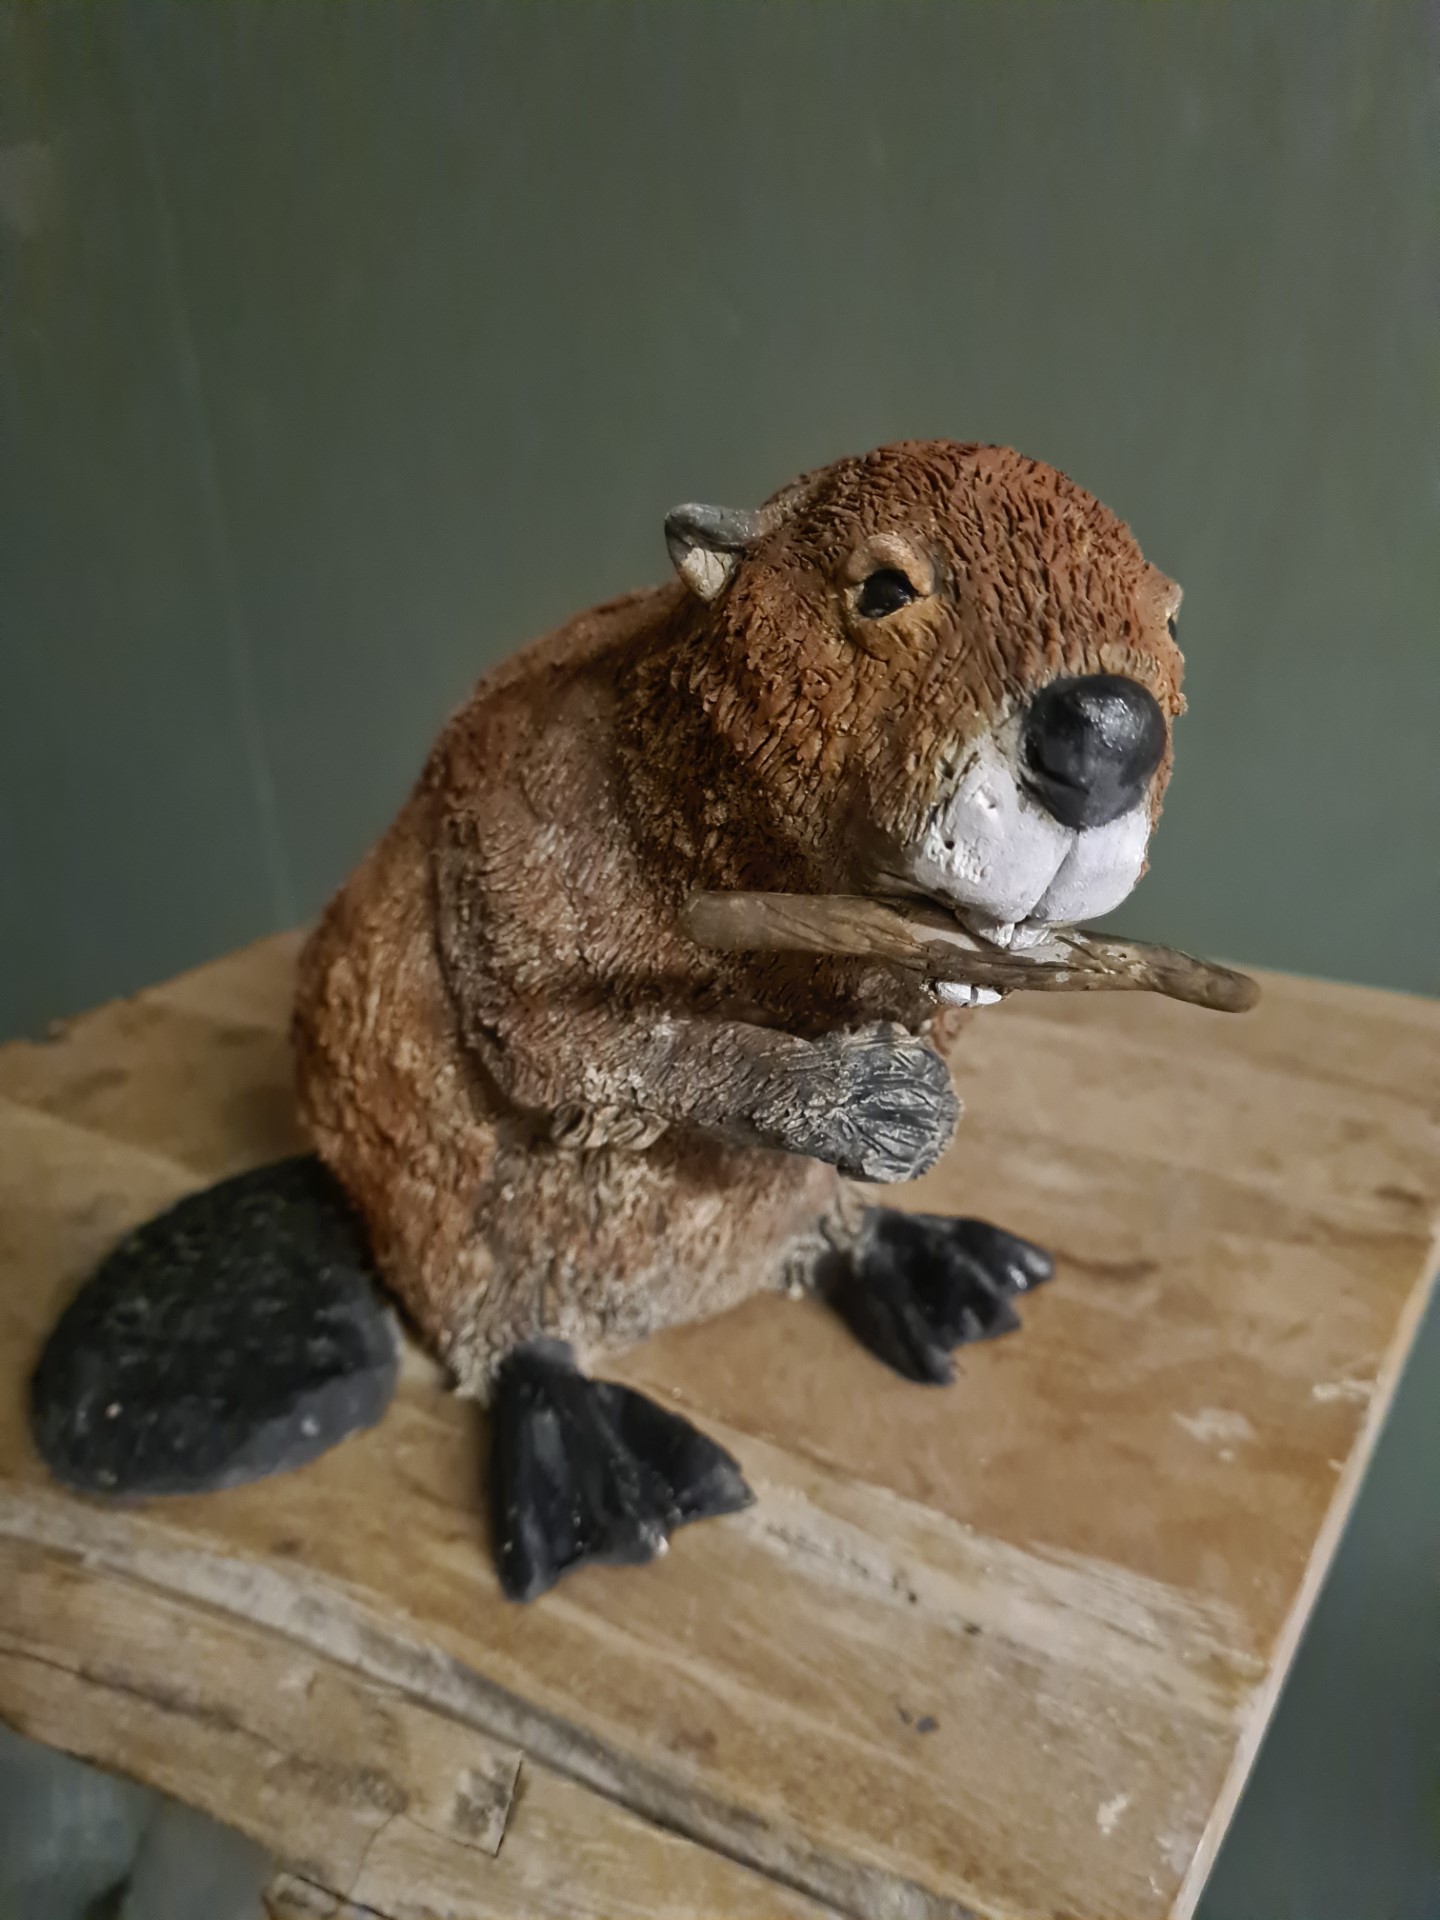 The first ever Beaver workshop on Sat 20th April at my Studio in Bradford